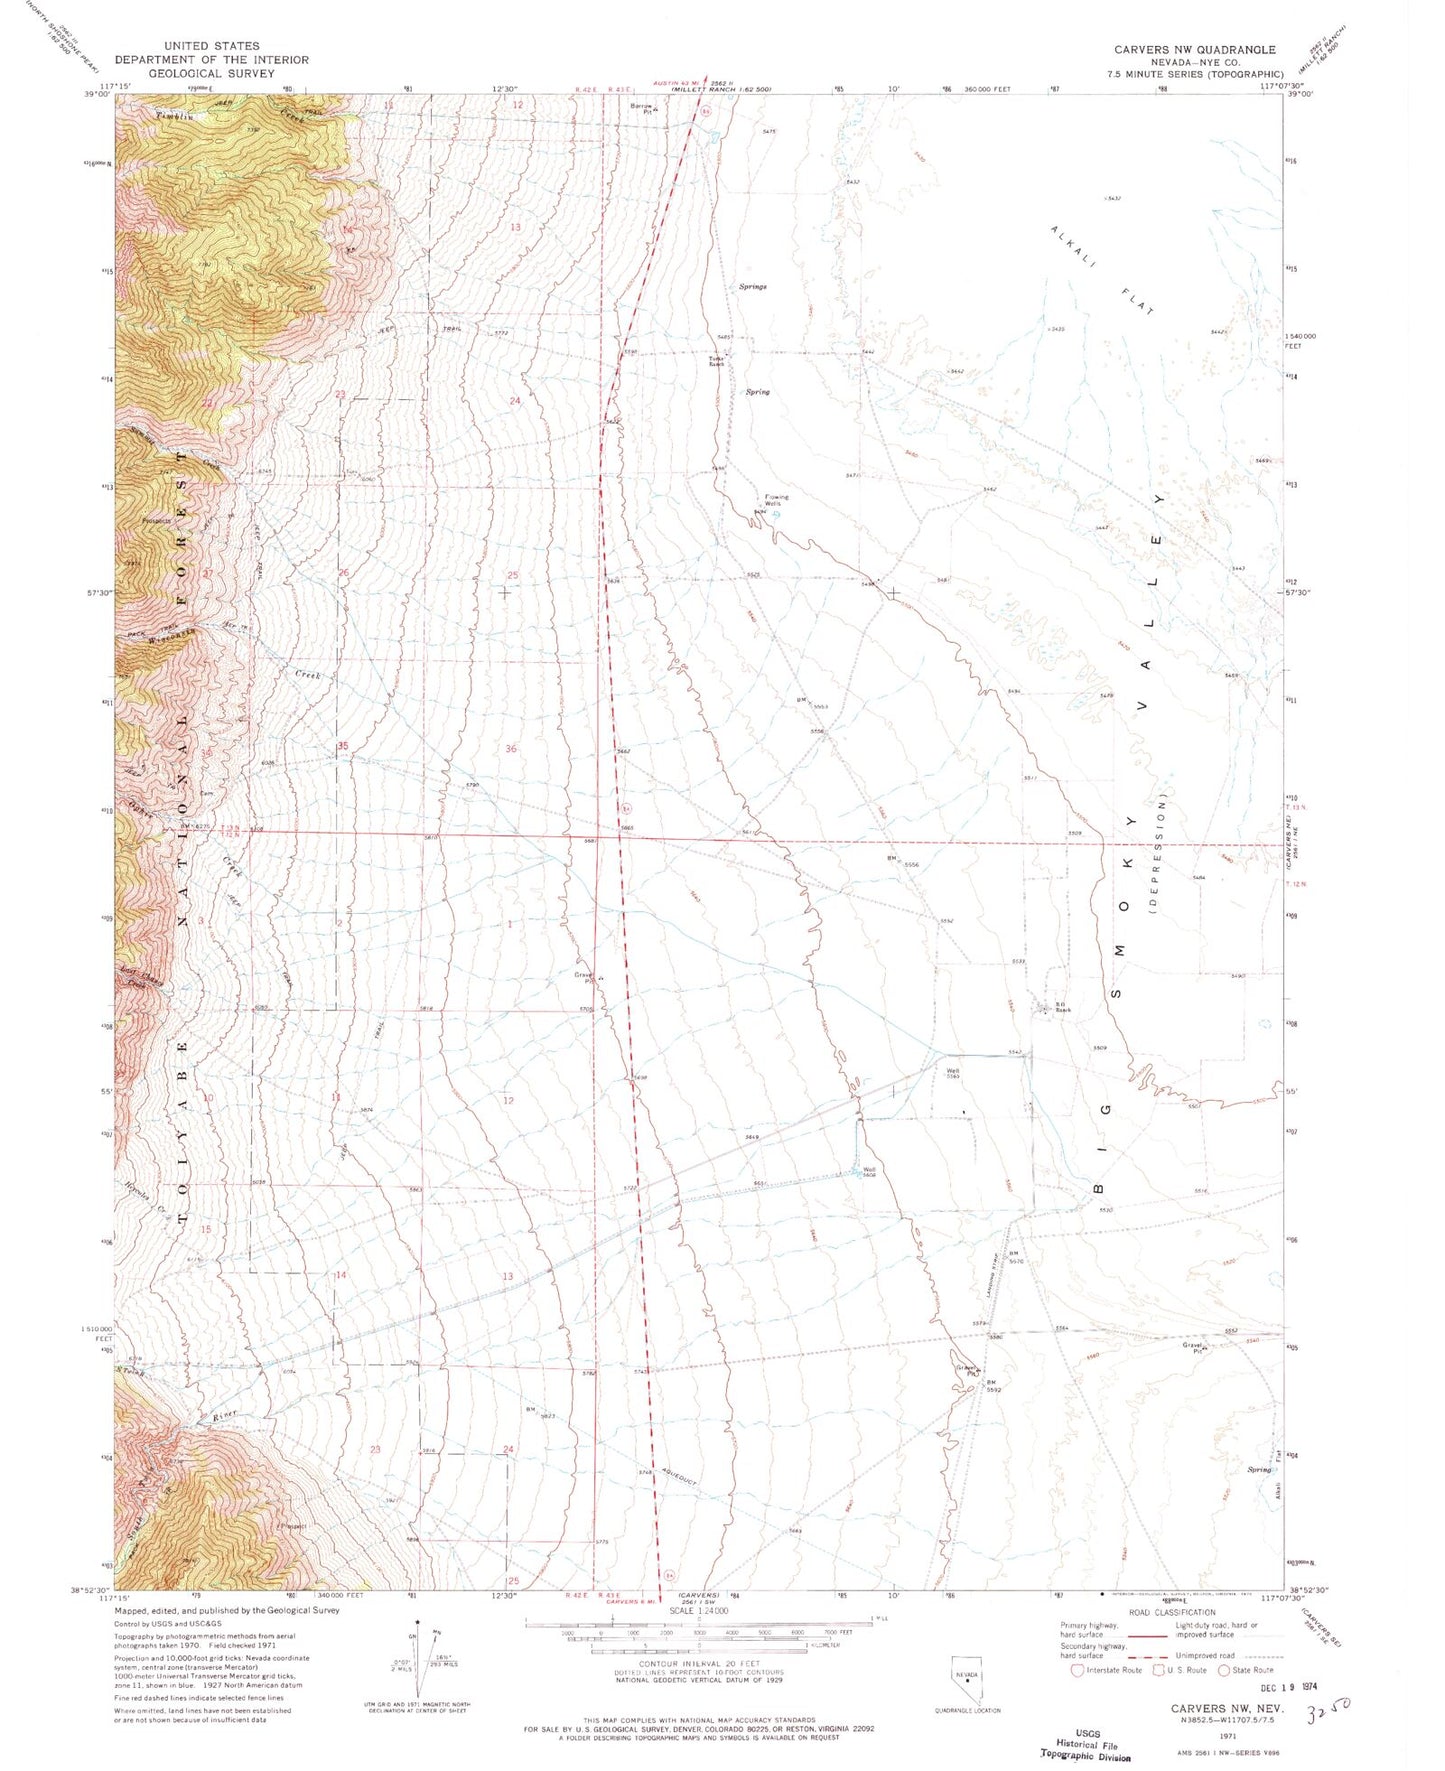 Classic USGS Carvers NW Nevada 7.5'x7.5' Topo Map Image